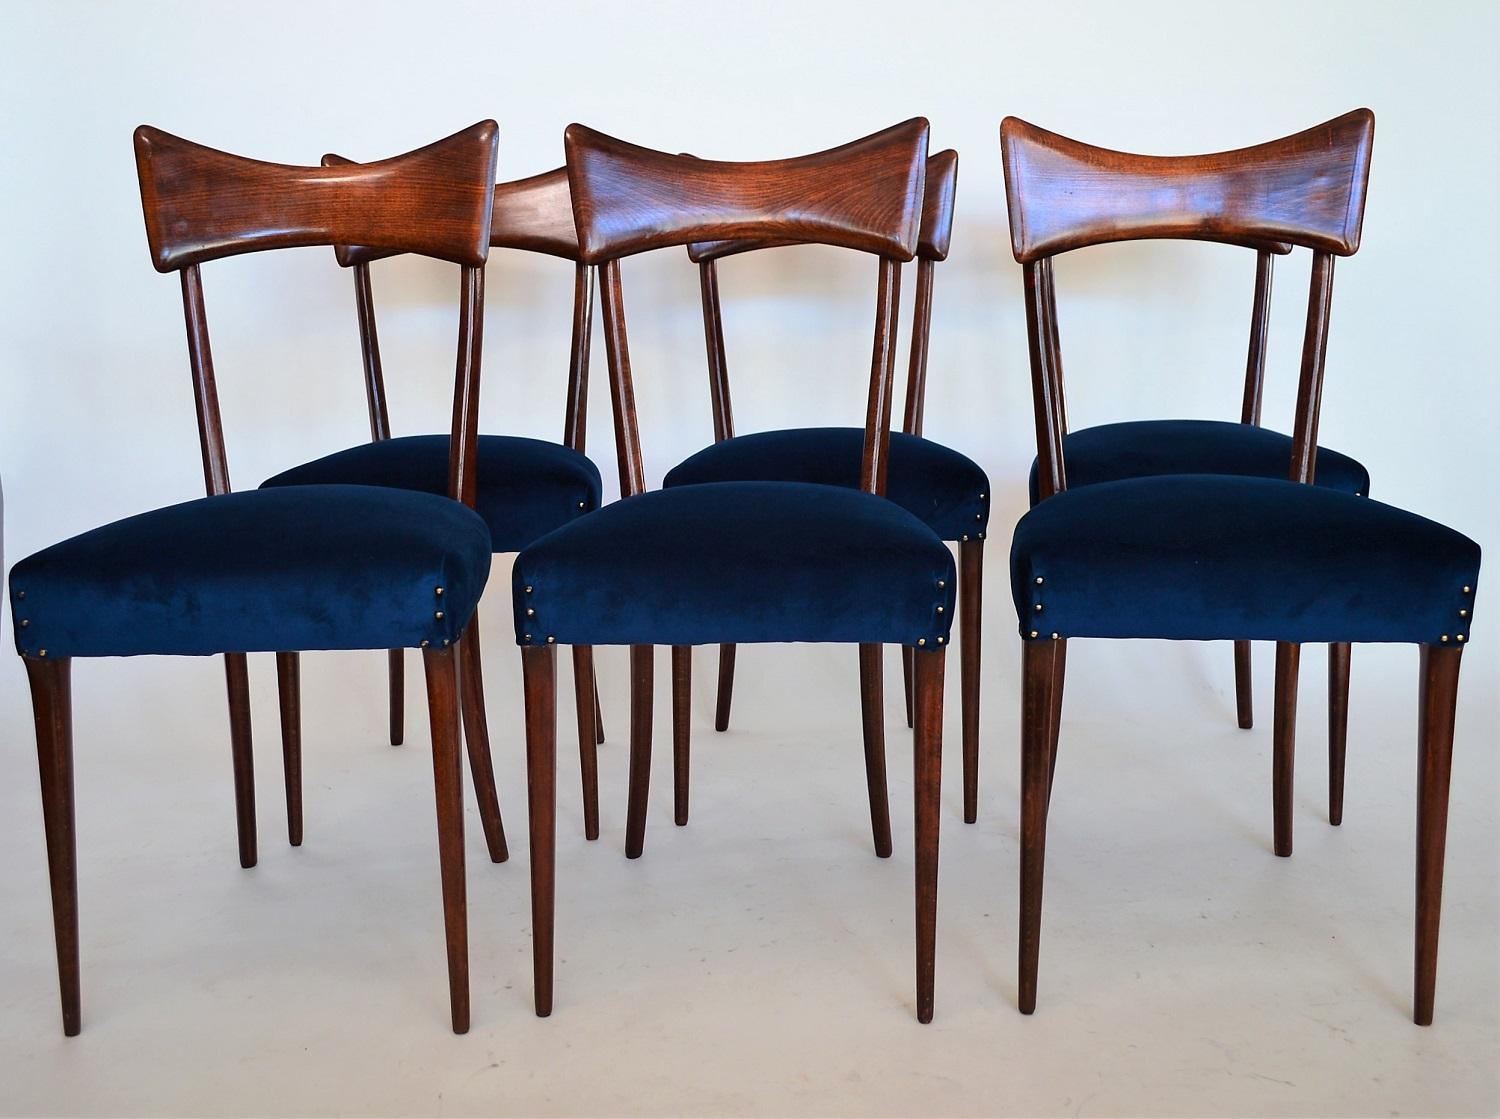 Beautiful set of six Italian midcentury dining chairs, made in the style of Ico Parisi during the 1950s.
The chairs are made in beechwood and stained originally in mahogany color.
The wood is in excellent dry condition with only very few signs of